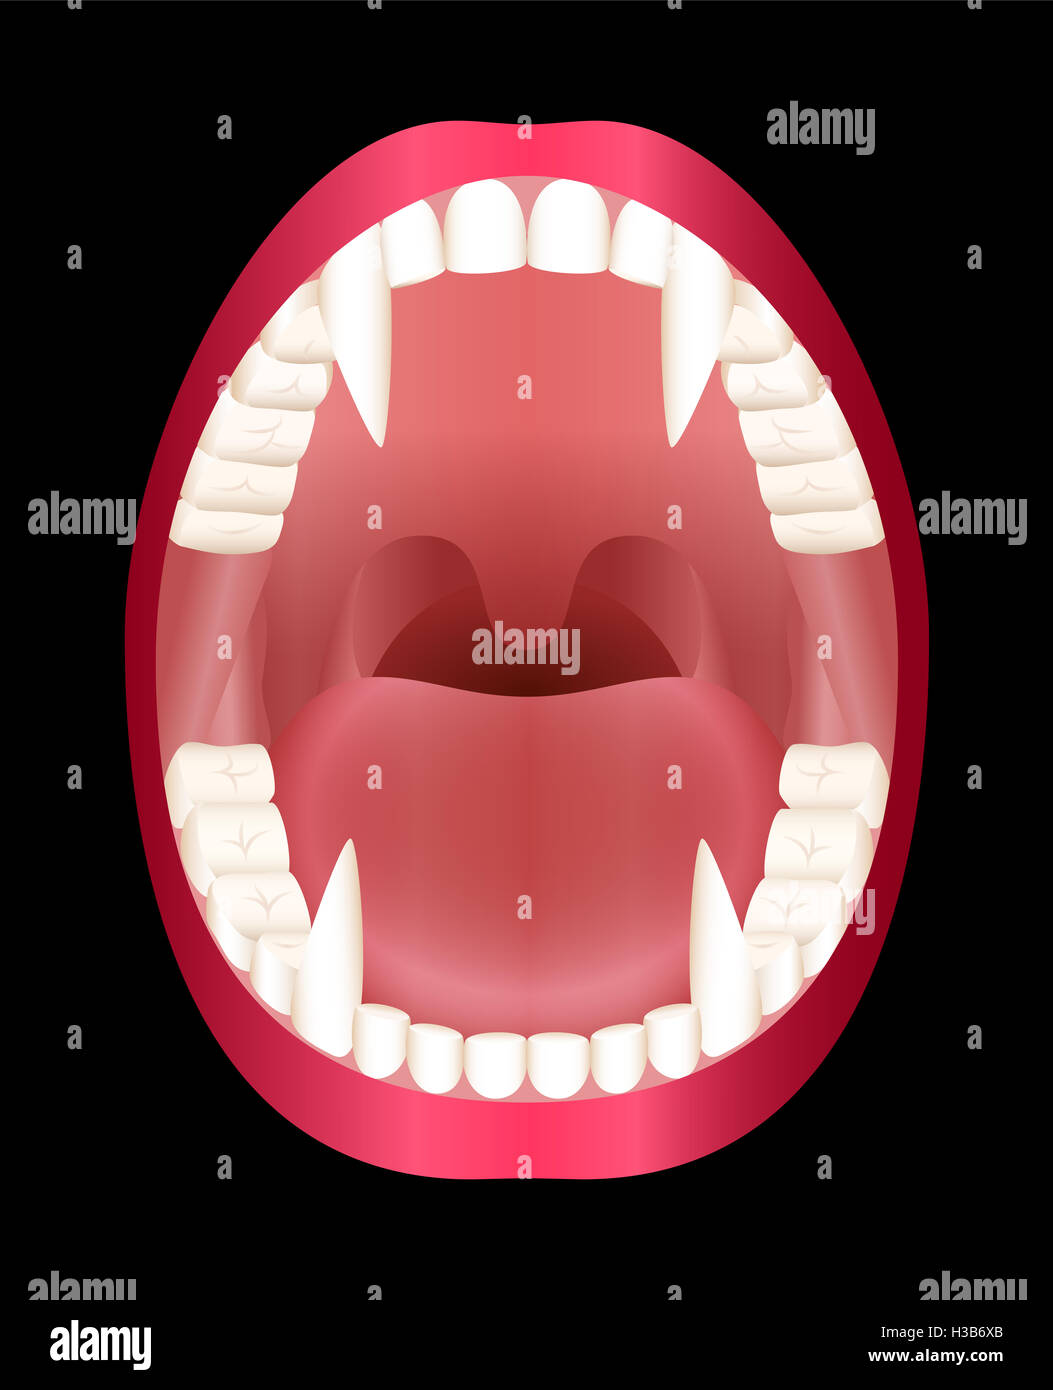 Fangs - vamps open mouth - illustration on black background. Stock Photo